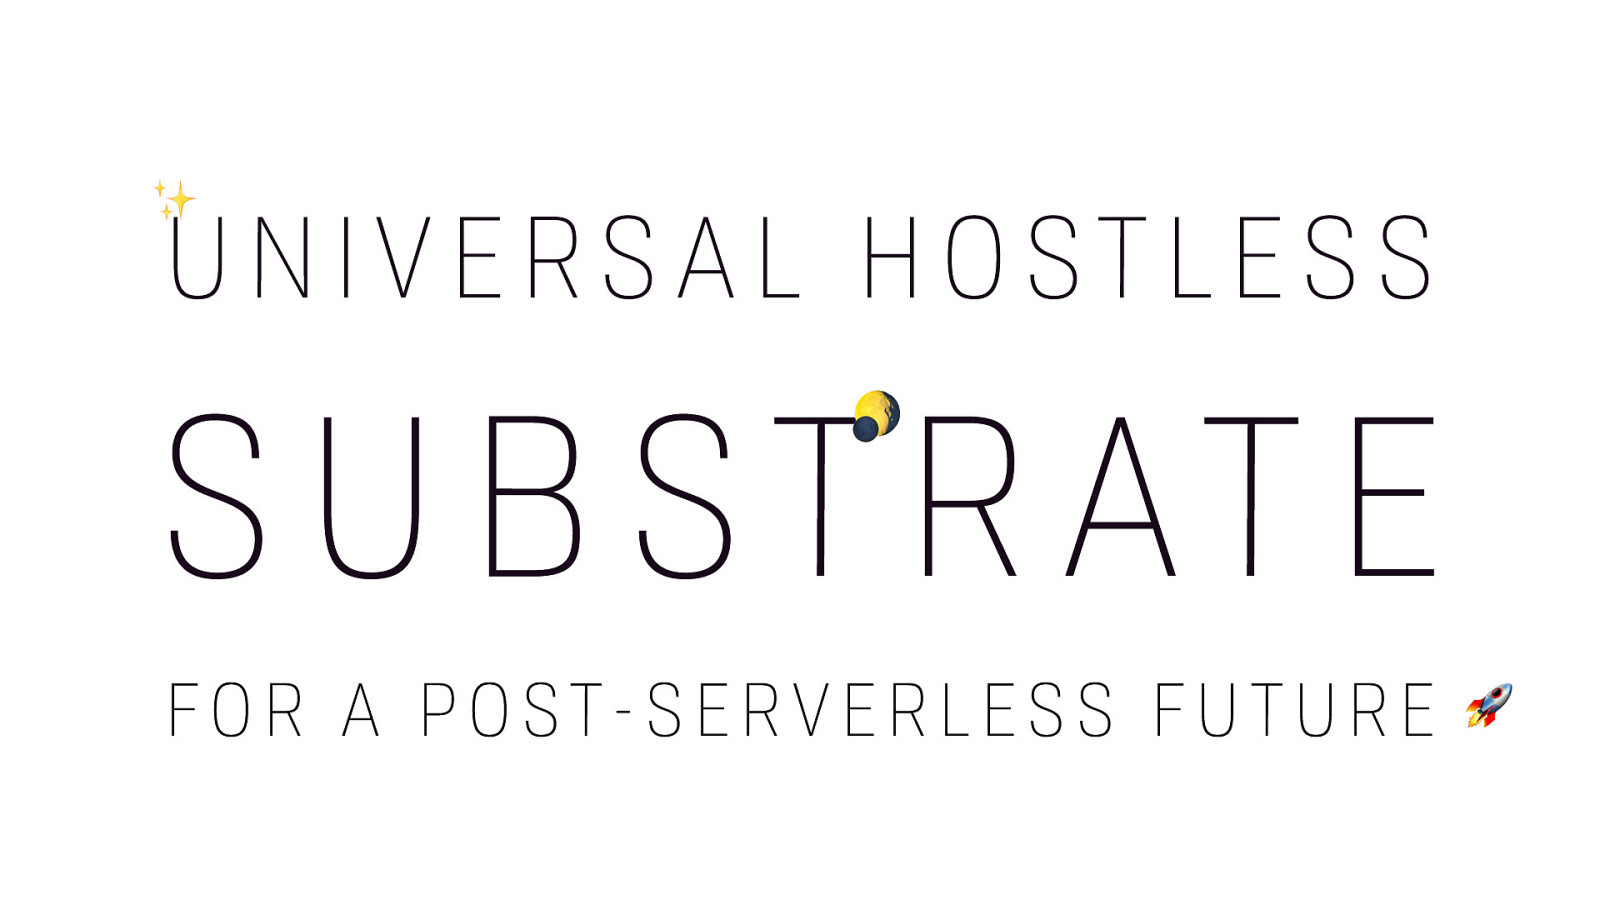 Mini Antwerp Edition! Universal Hostless Substrate for a Post-Servless Future